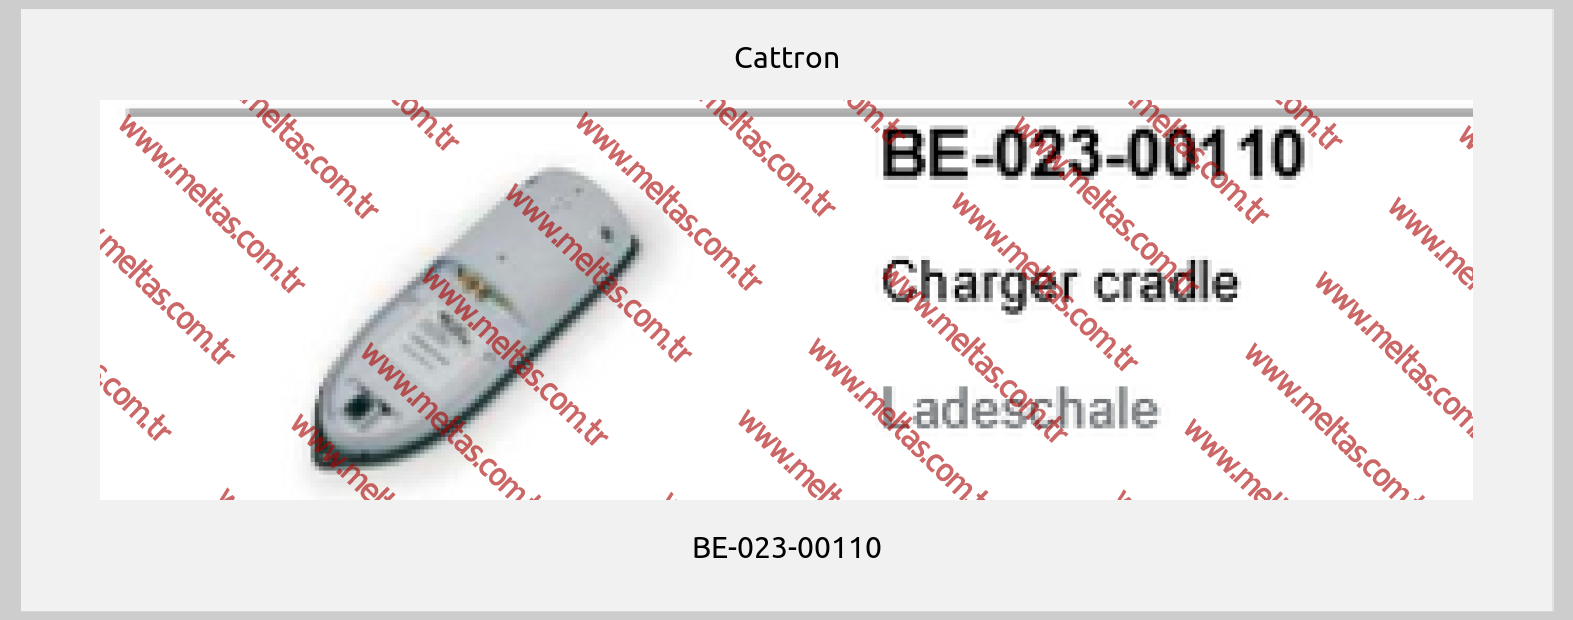 Cattron - BE-023-00110